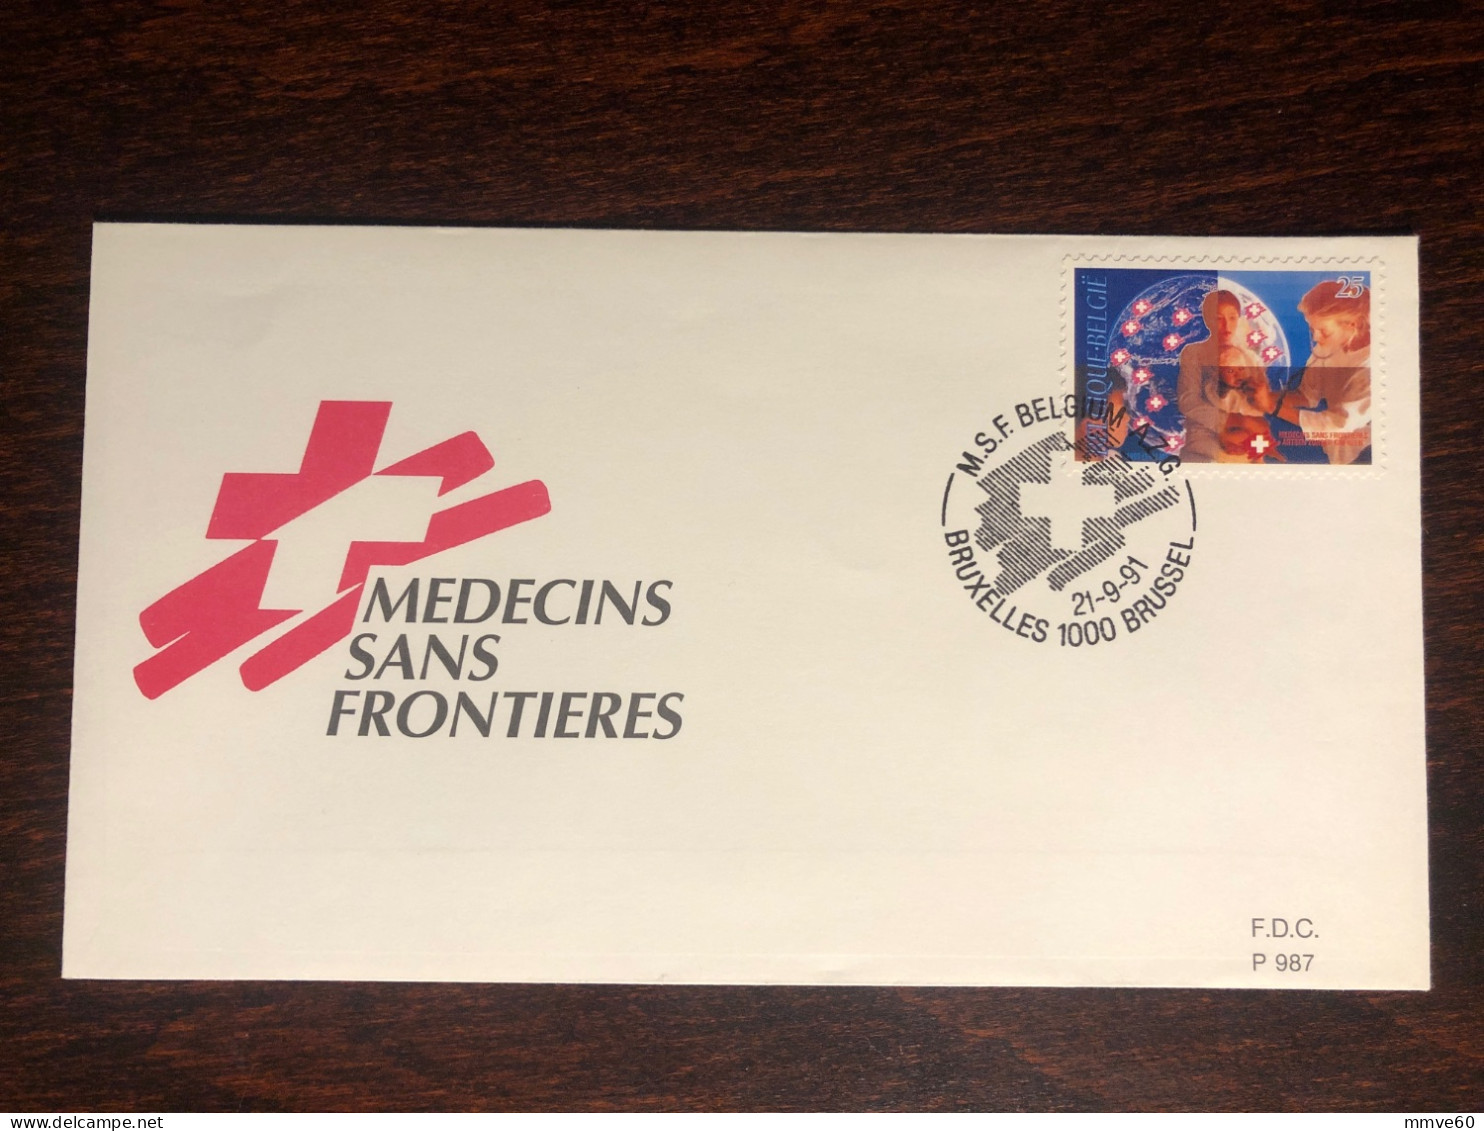 BELGIUM FDC COVER 1991 YEAR DOCTORS WITHOUT BORDERS HEALTH MEDICINE STAMPS - Covers & Documents